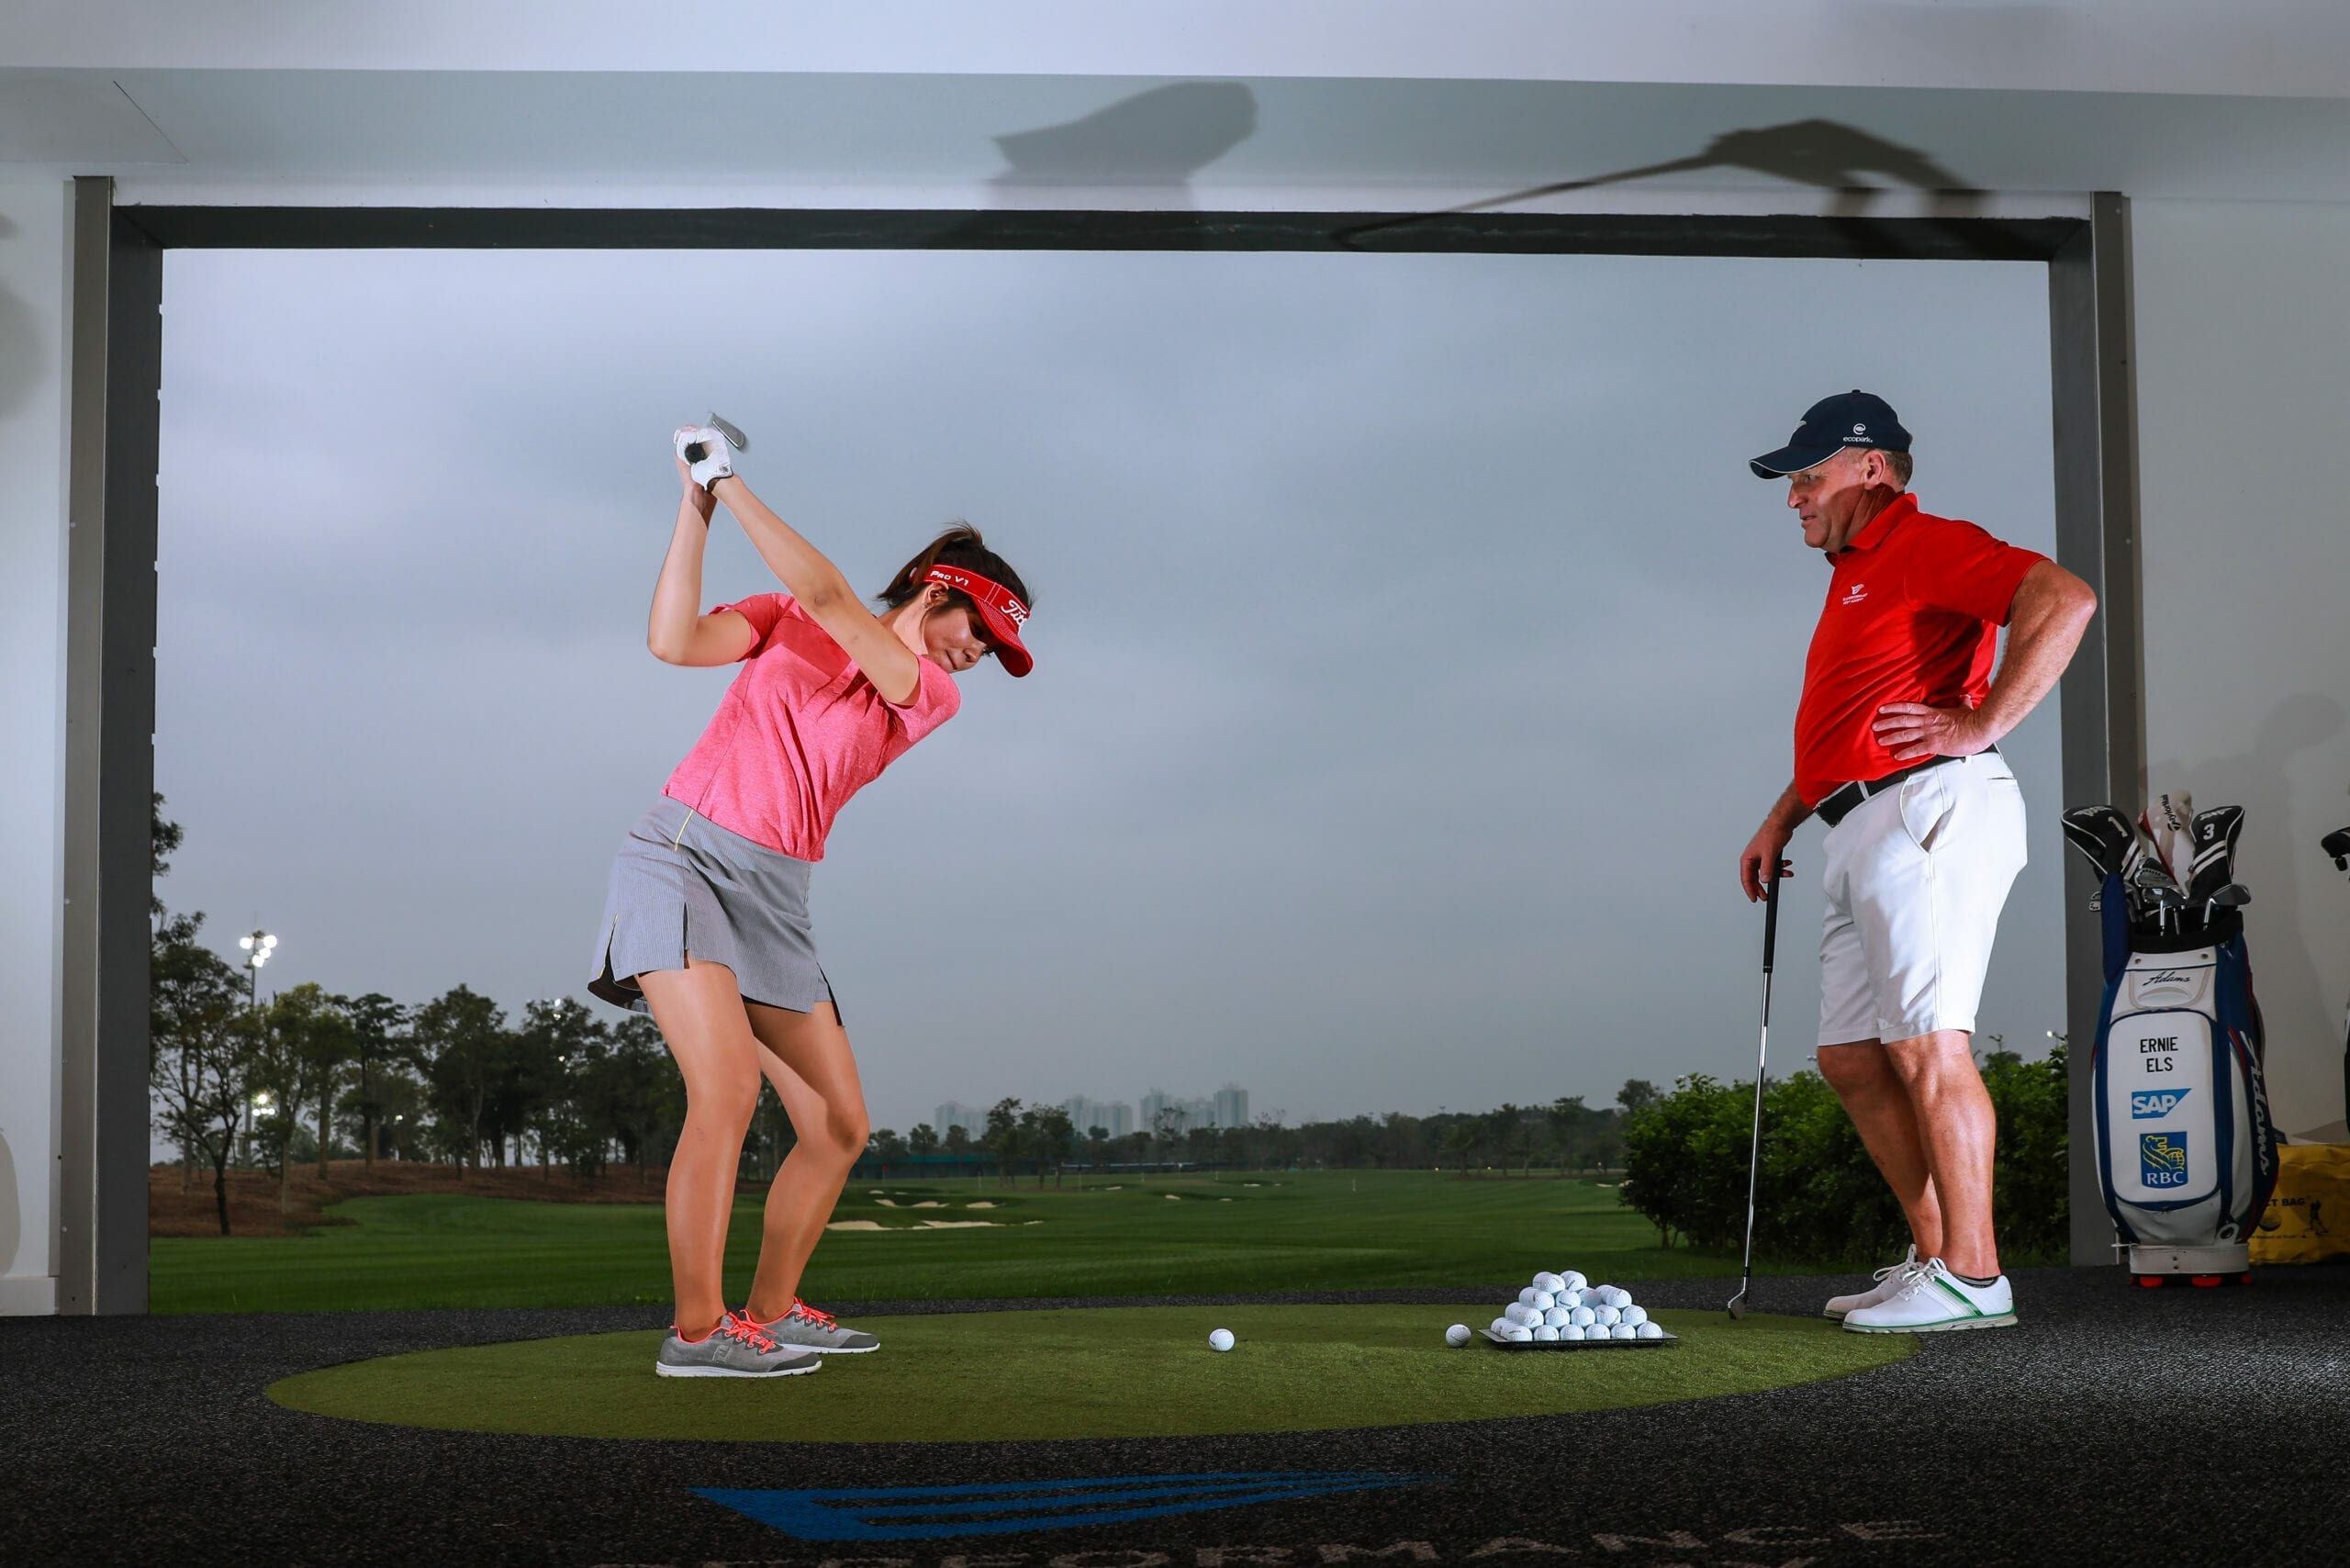 woman taking a golf swing with instructor watching over